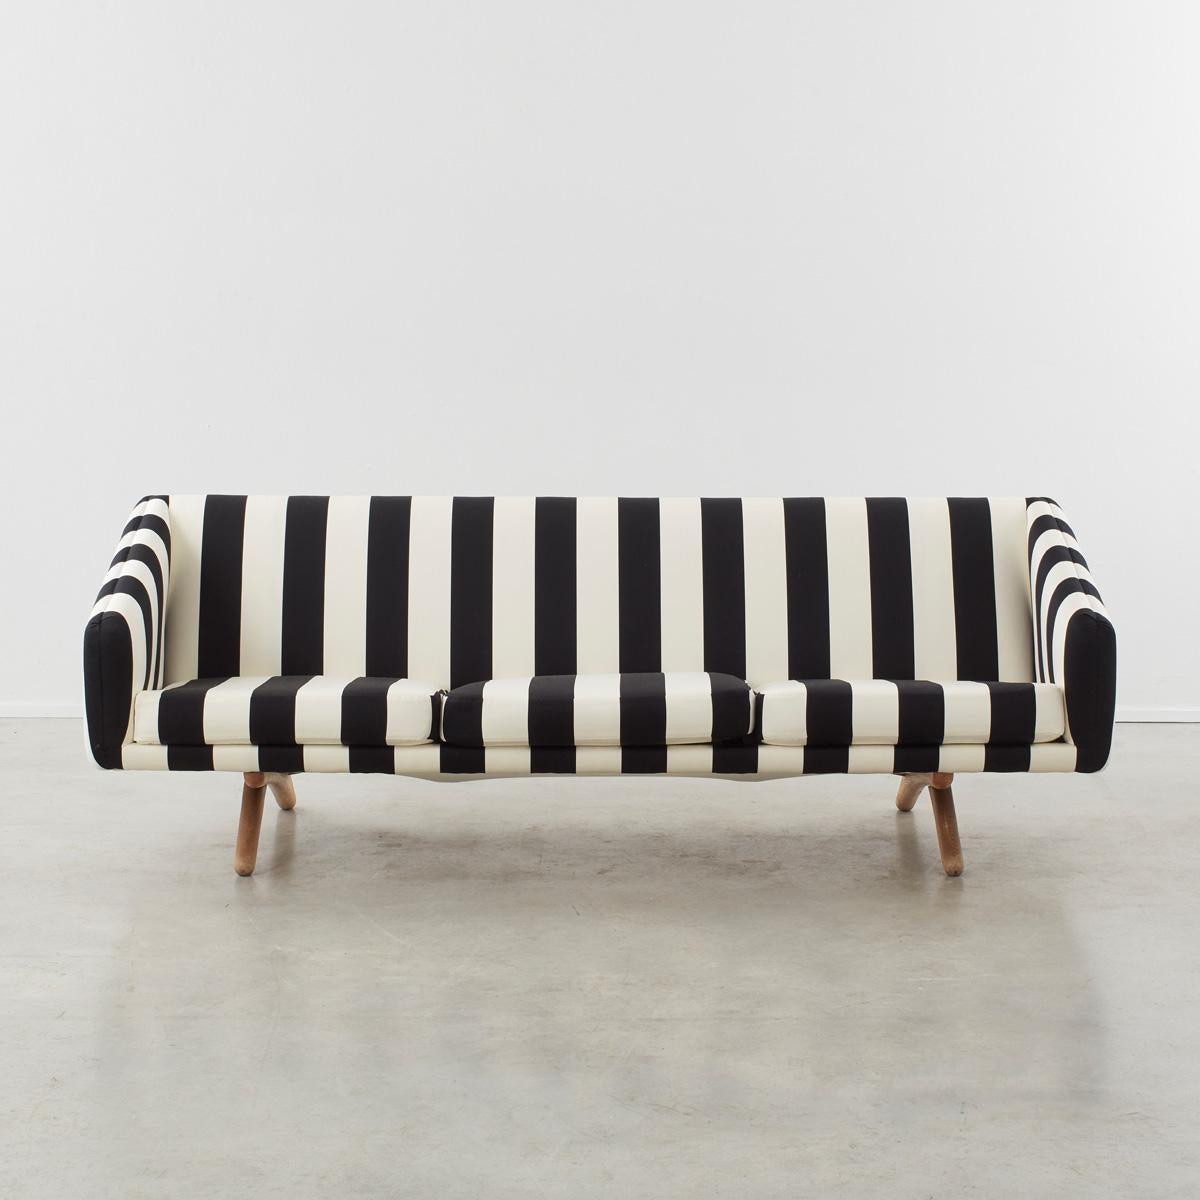 Kristian Illum Wikkelsø (1919–1999) was a Danish furniture designer whose key work, including the ML-90 sofa, was made during the heyday of Danish design in the 1950s and 1960s. Much admired and worthy of its designation as a mid-century icon, this